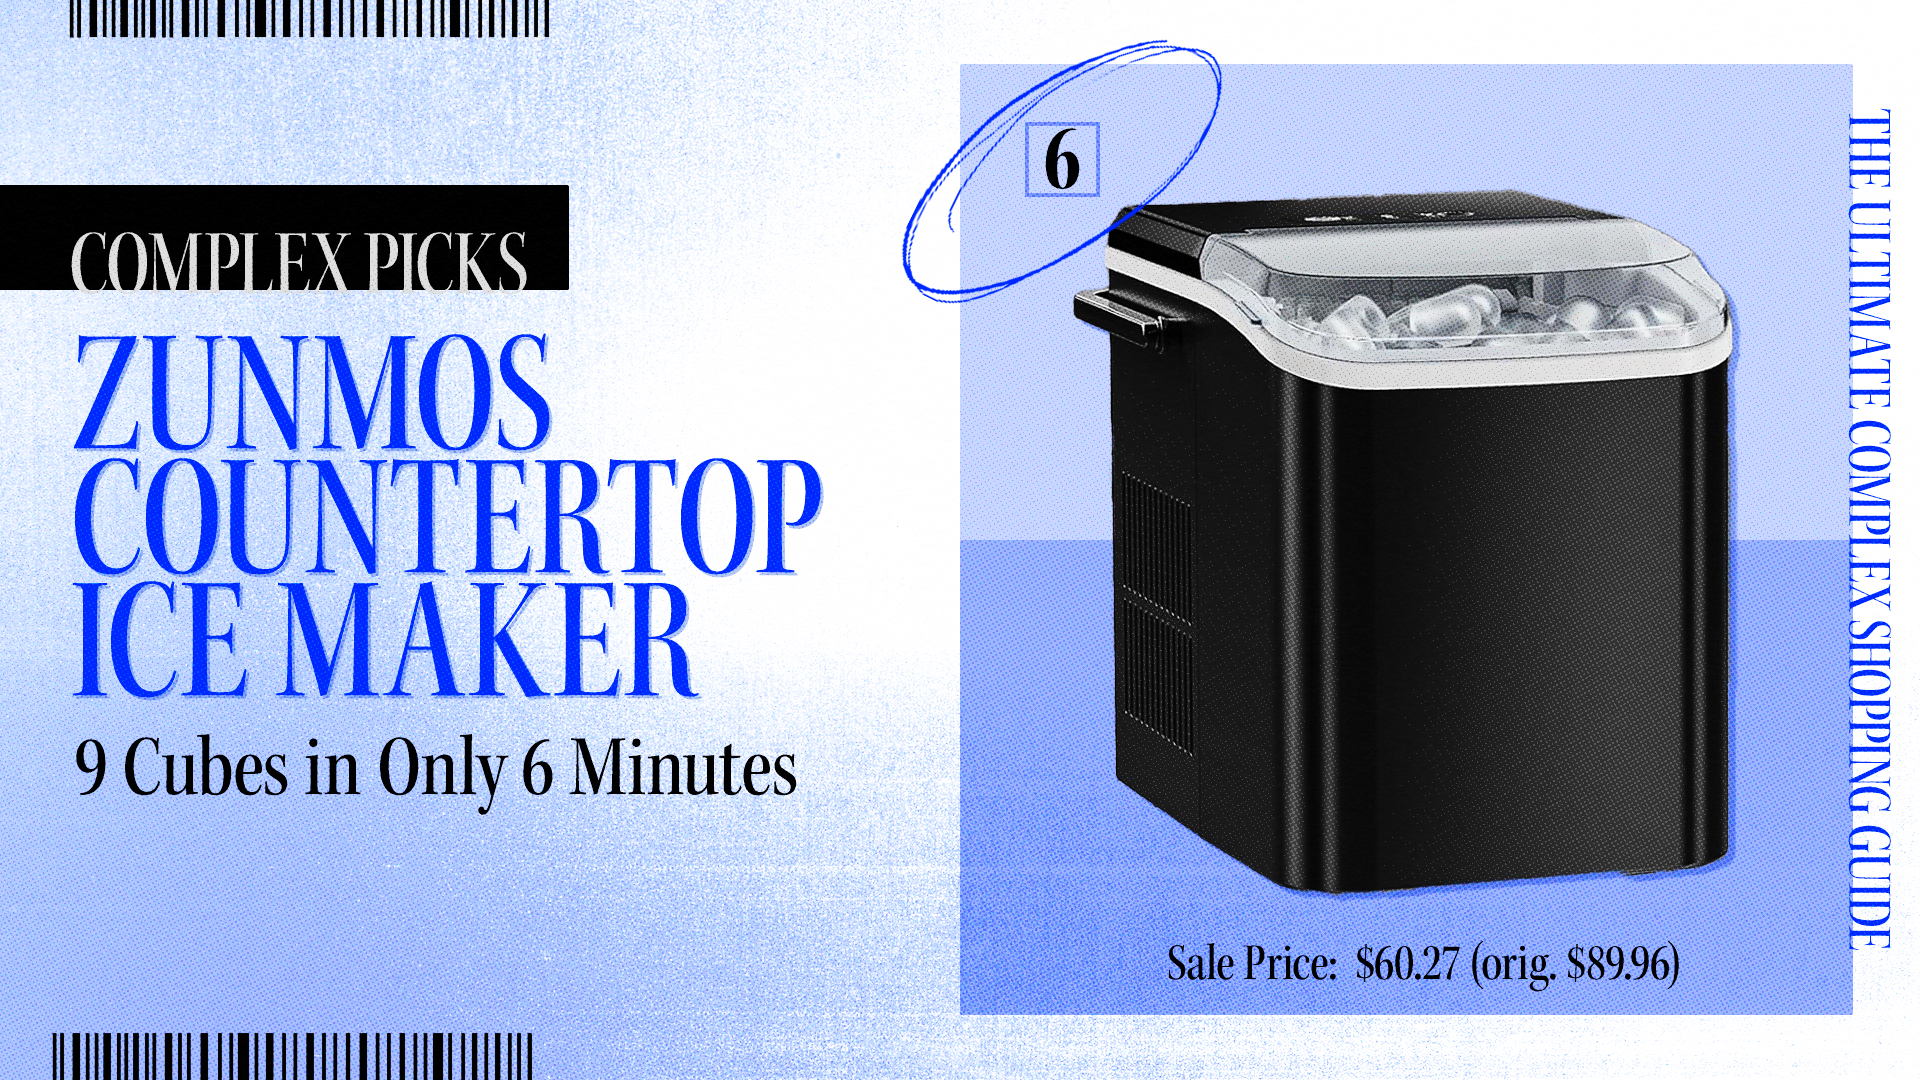 Zunmos Countertop Ice Maker, featured in Complex Picks, makes 9 cubes in 6 minutes. Sale price: $60.27 (originally $89.96) in The Ultimate Complex Shopping Guide